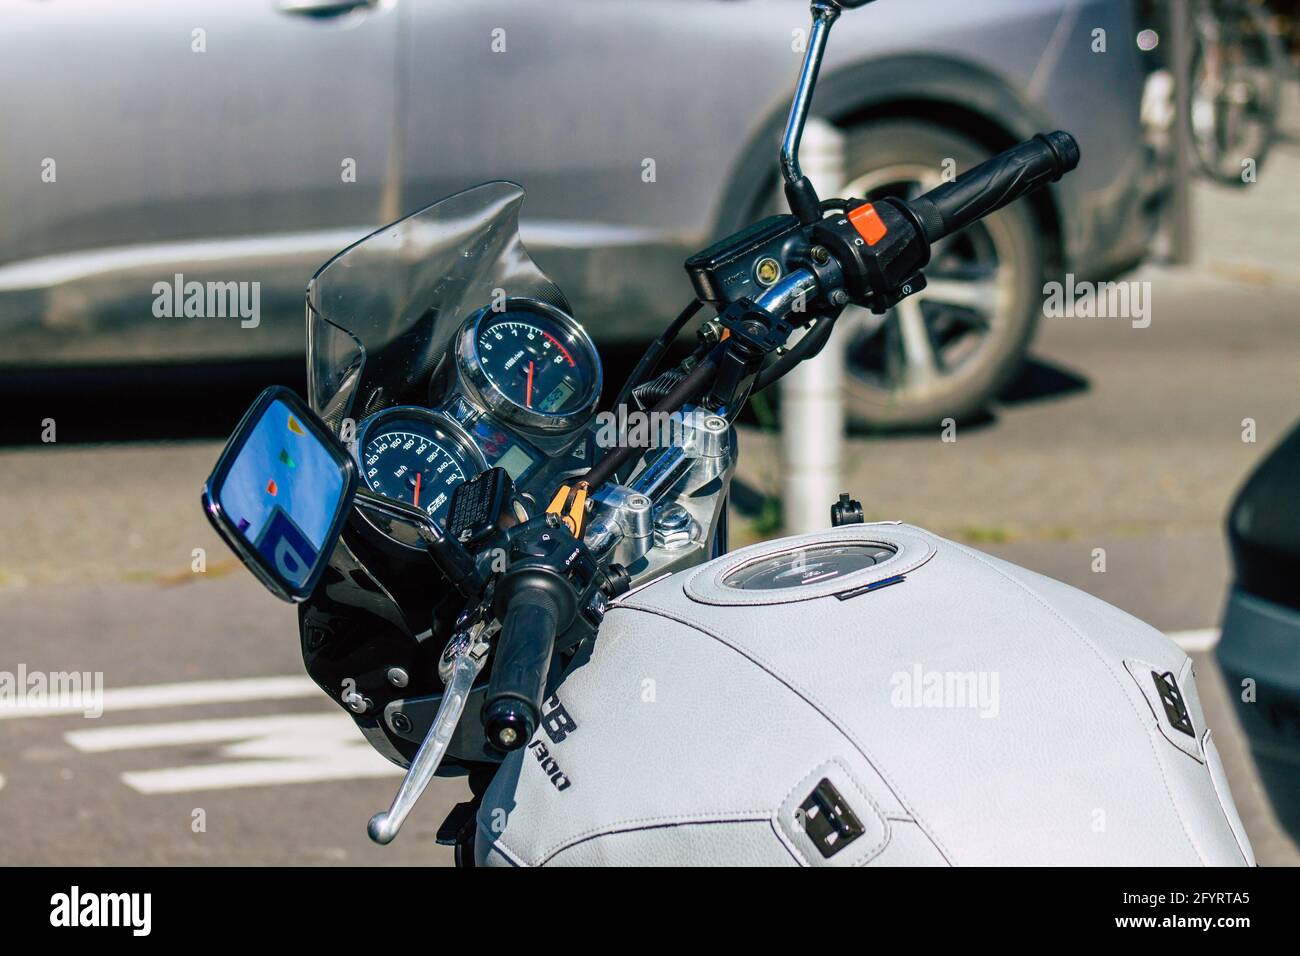 Reims France May 29, 2021 Closeup of the mechanics of a motorcycle parked  in a parking lot located in the city center of Reims Stock Photo - Alamy